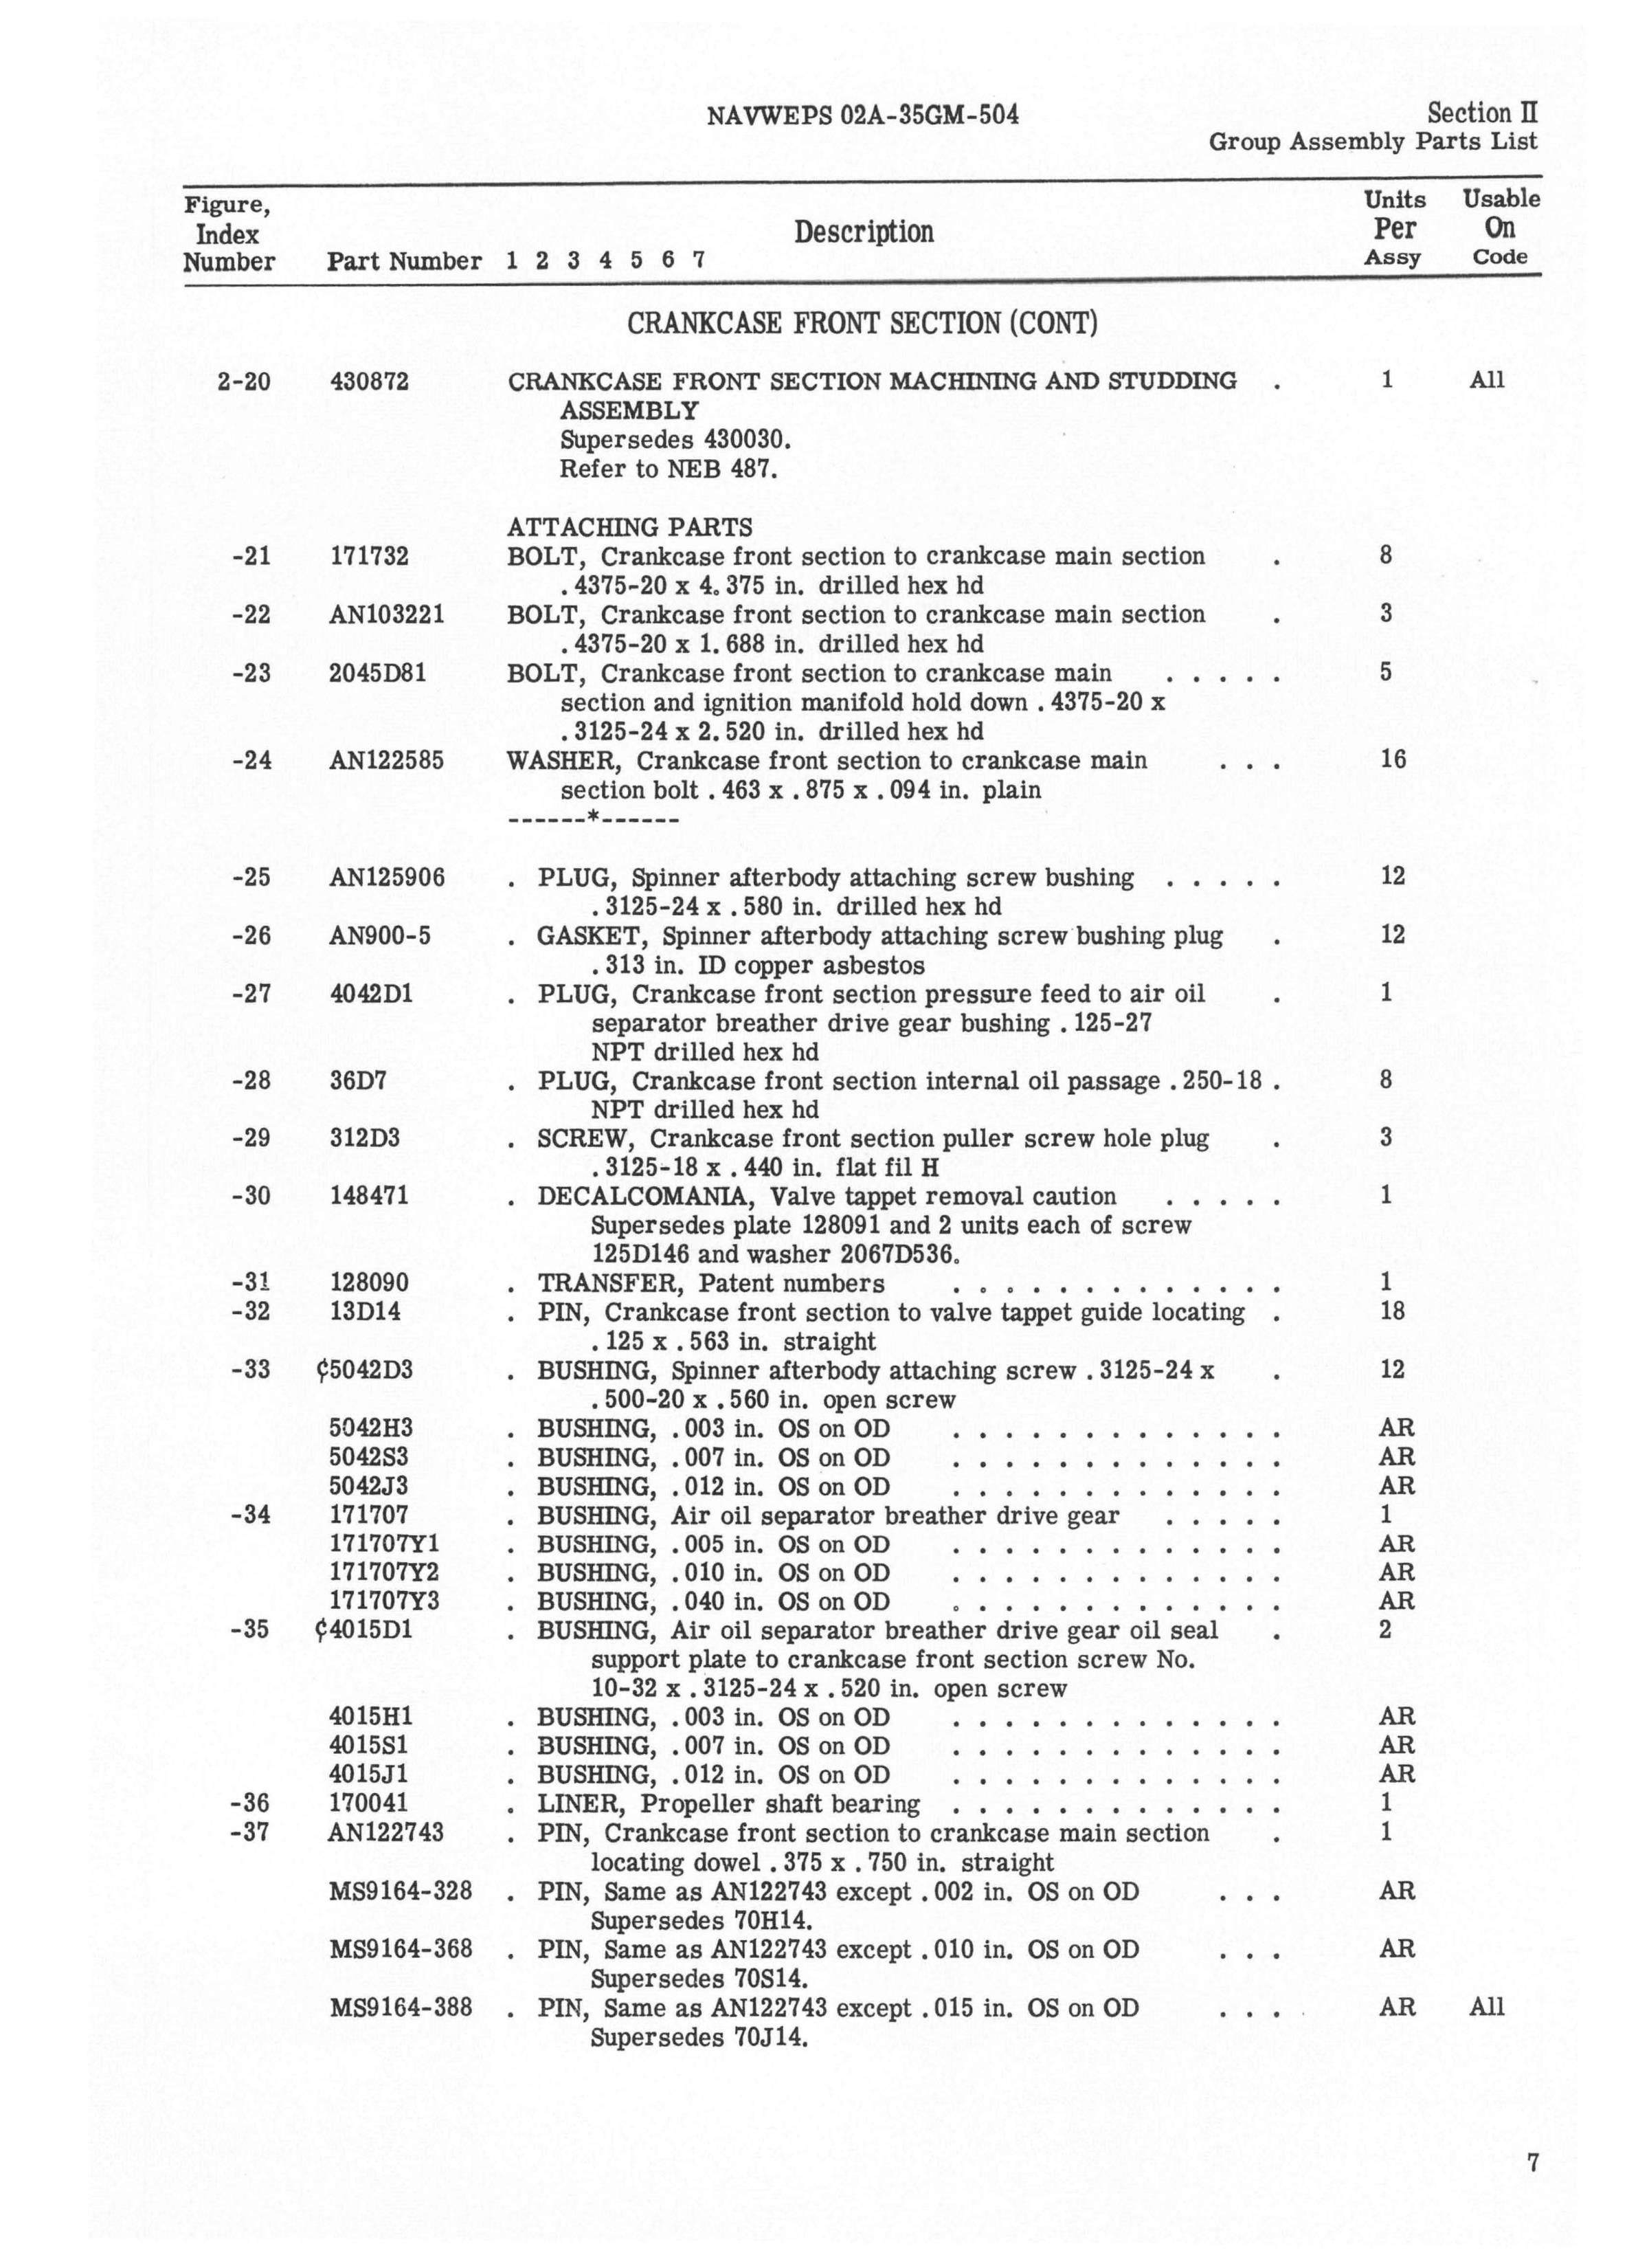 Sample page 13 from AirCorps Library document: Illustrated Parts Breakdown for R1820-84A, B, C, and D Engines